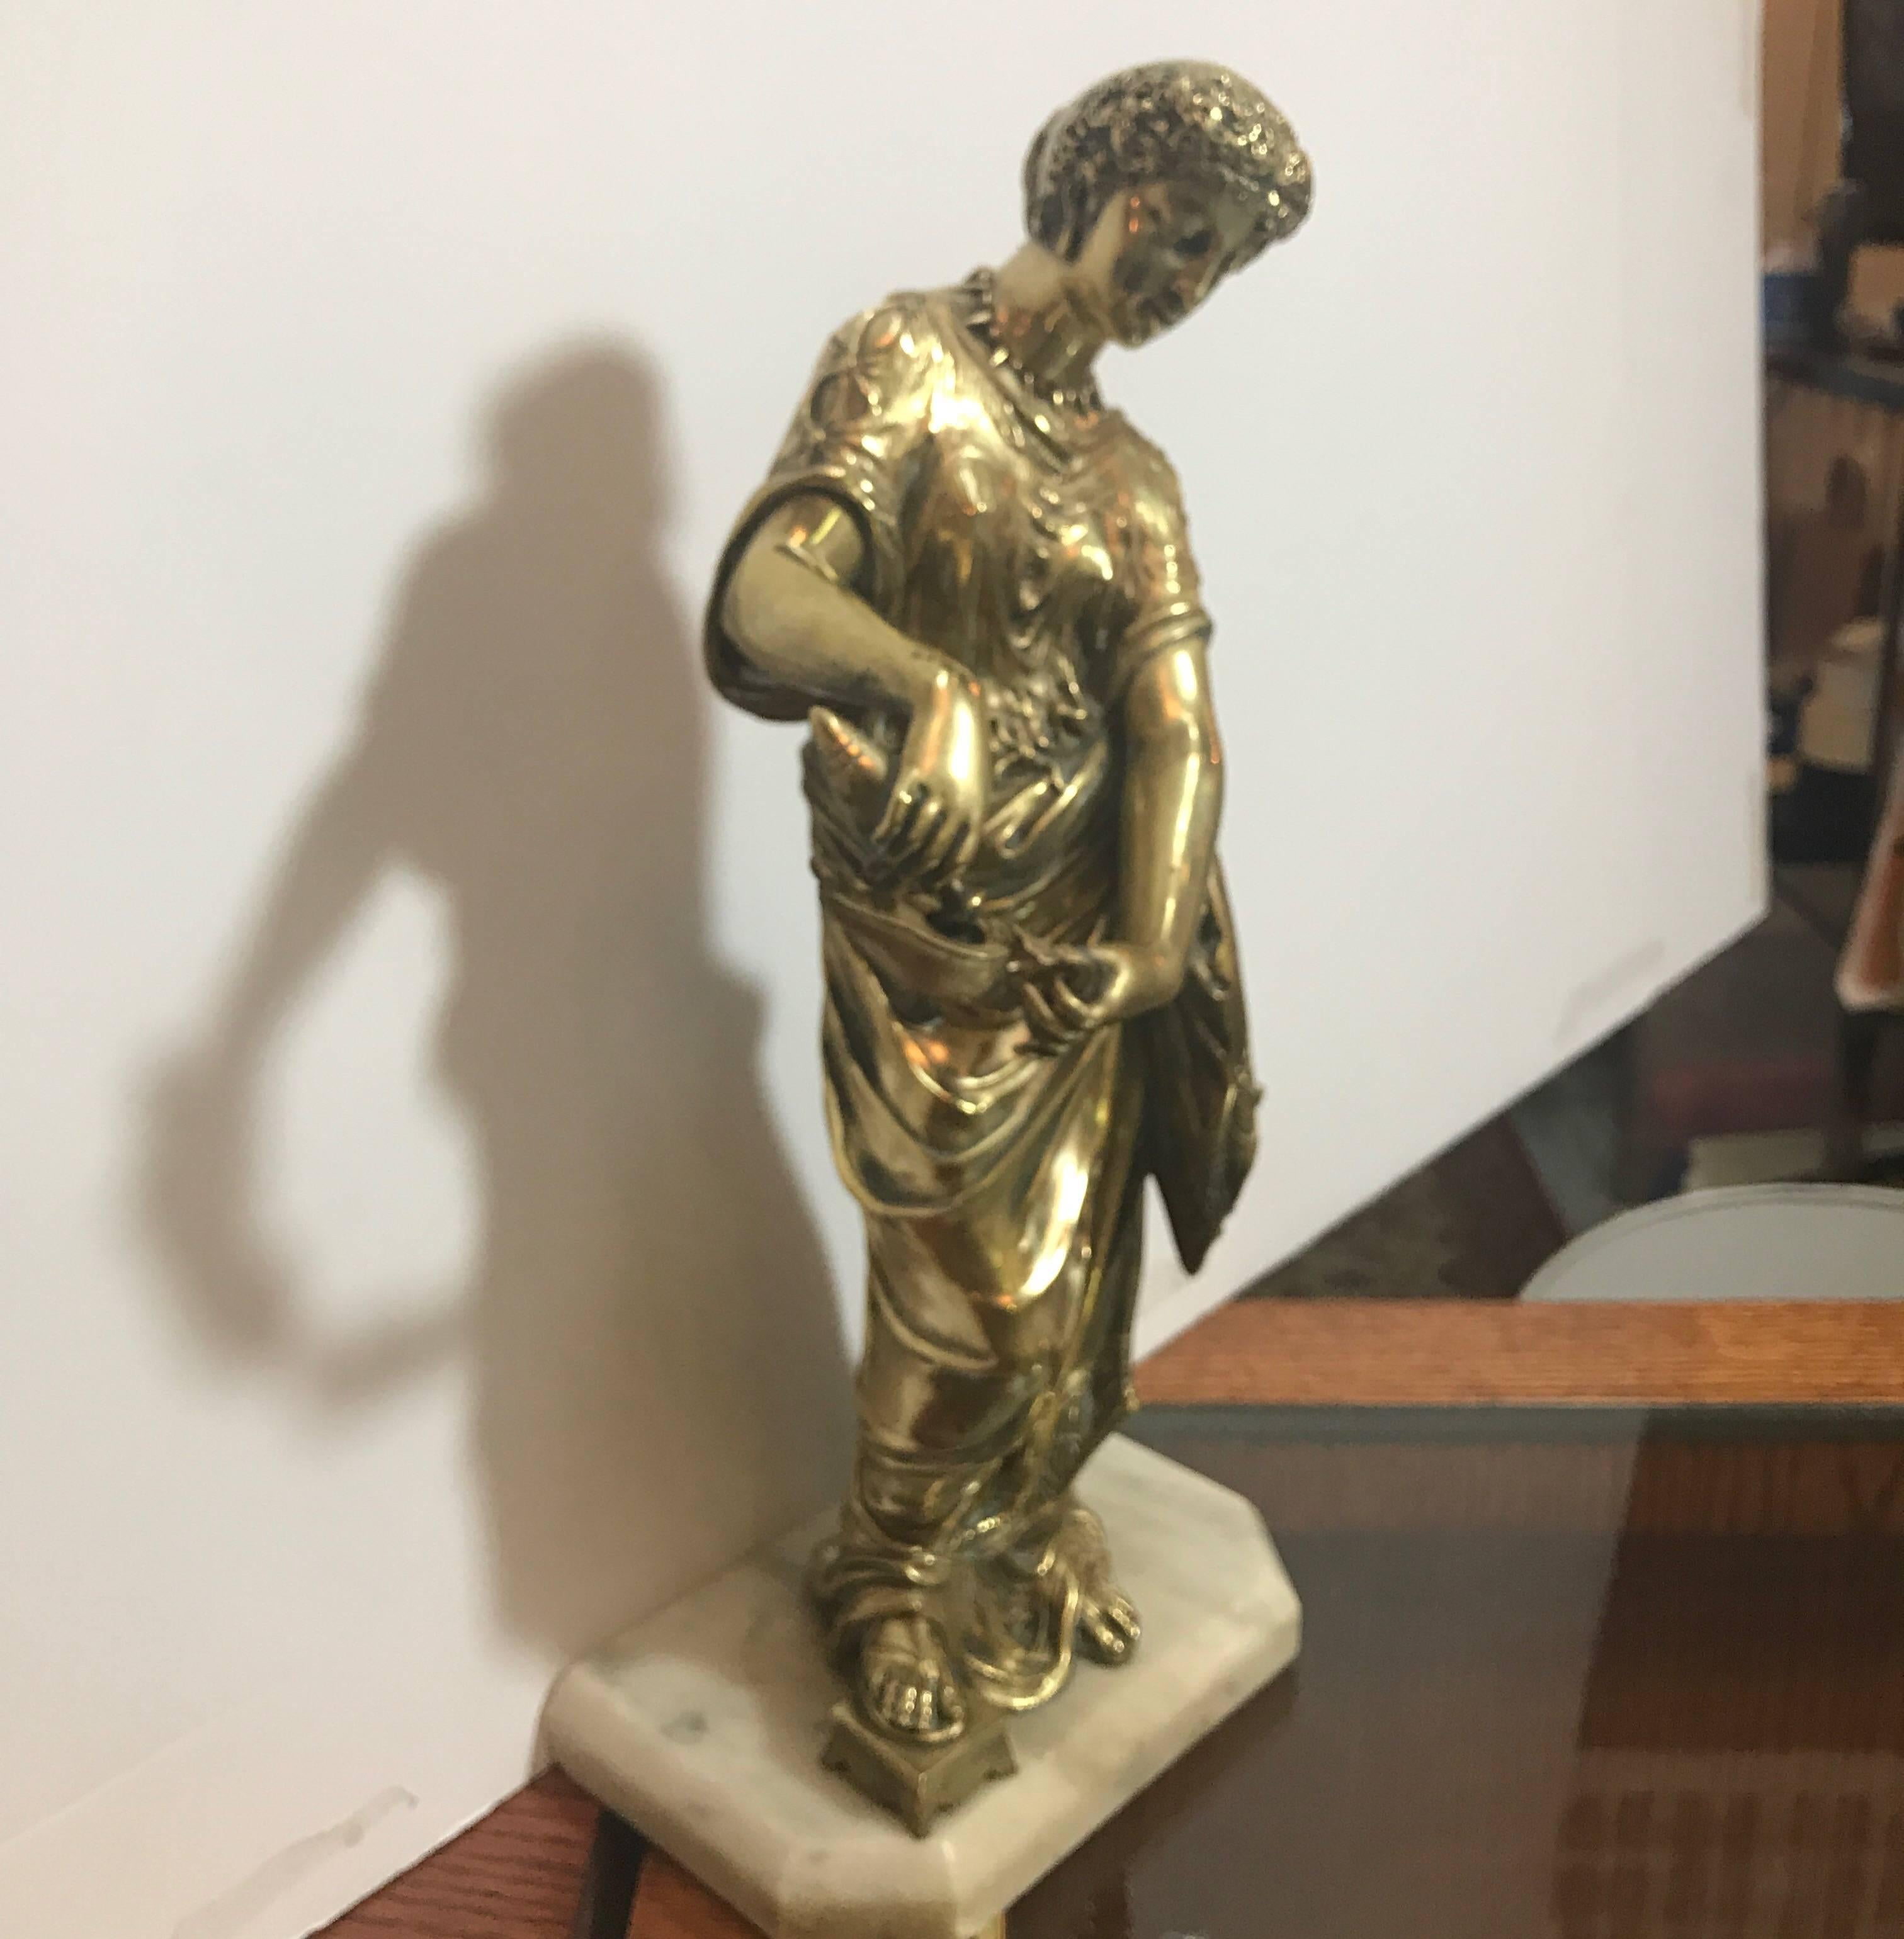 A beautifully cast bronze figure of a Greek maiden filling a lamp with oil. The polished bronze figure on white marble base in classic ancient Grecian dress.